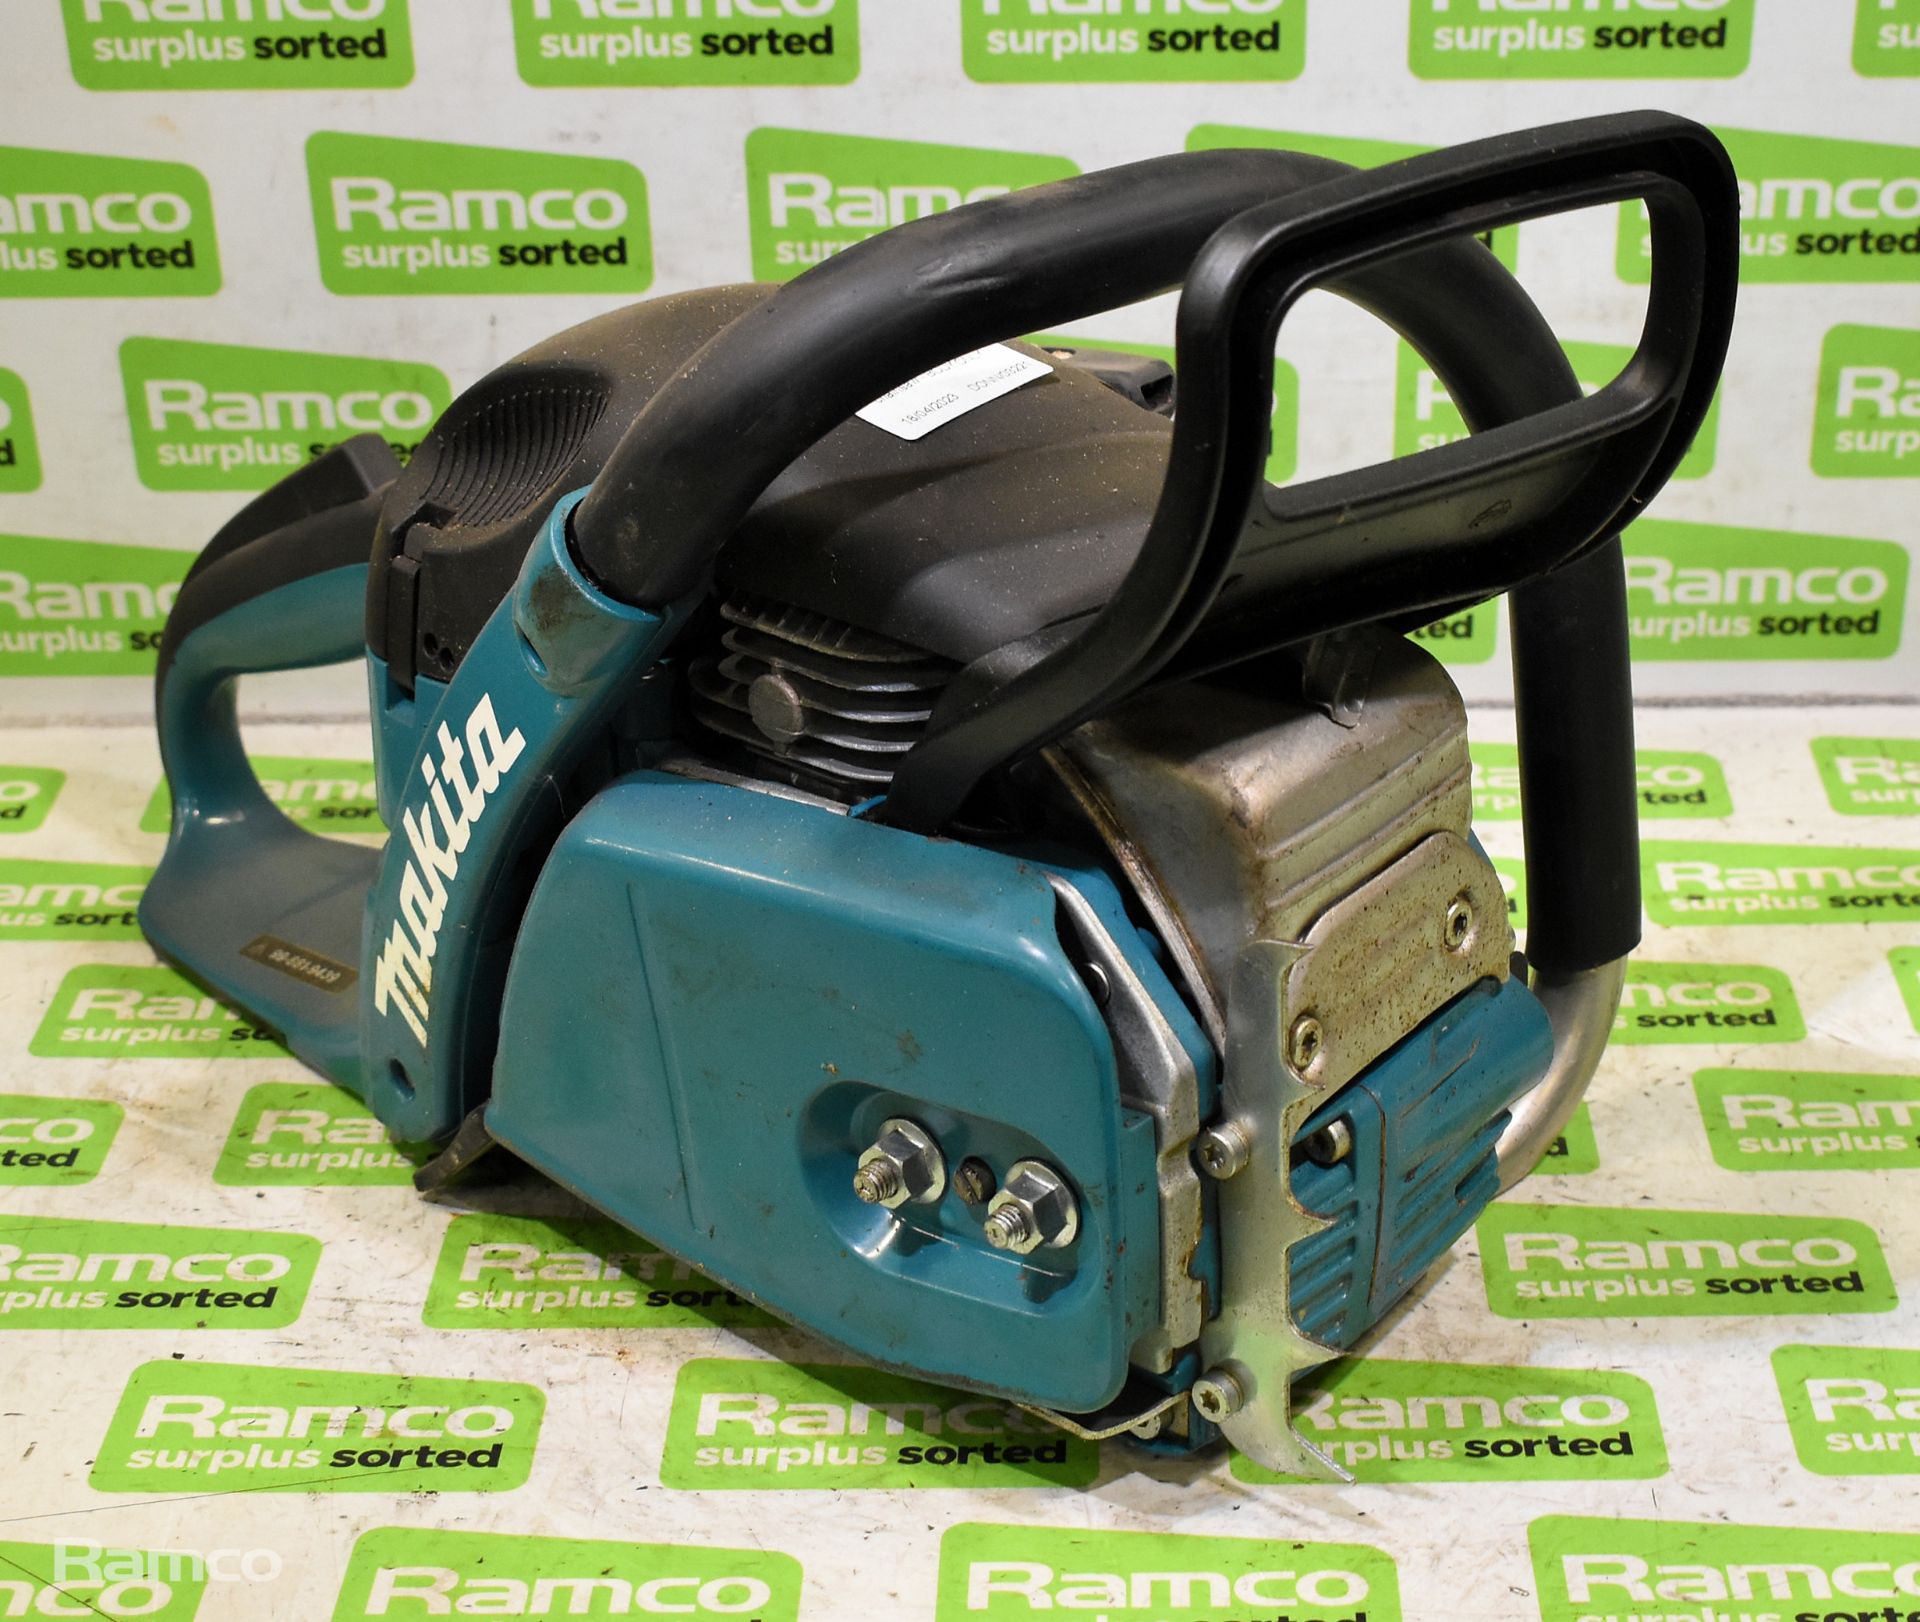 6x Makita DCS5030 50cc petrol chainsaw - BODIES ONLY - AS SPARES & REPAIRS - Image 5 of 33